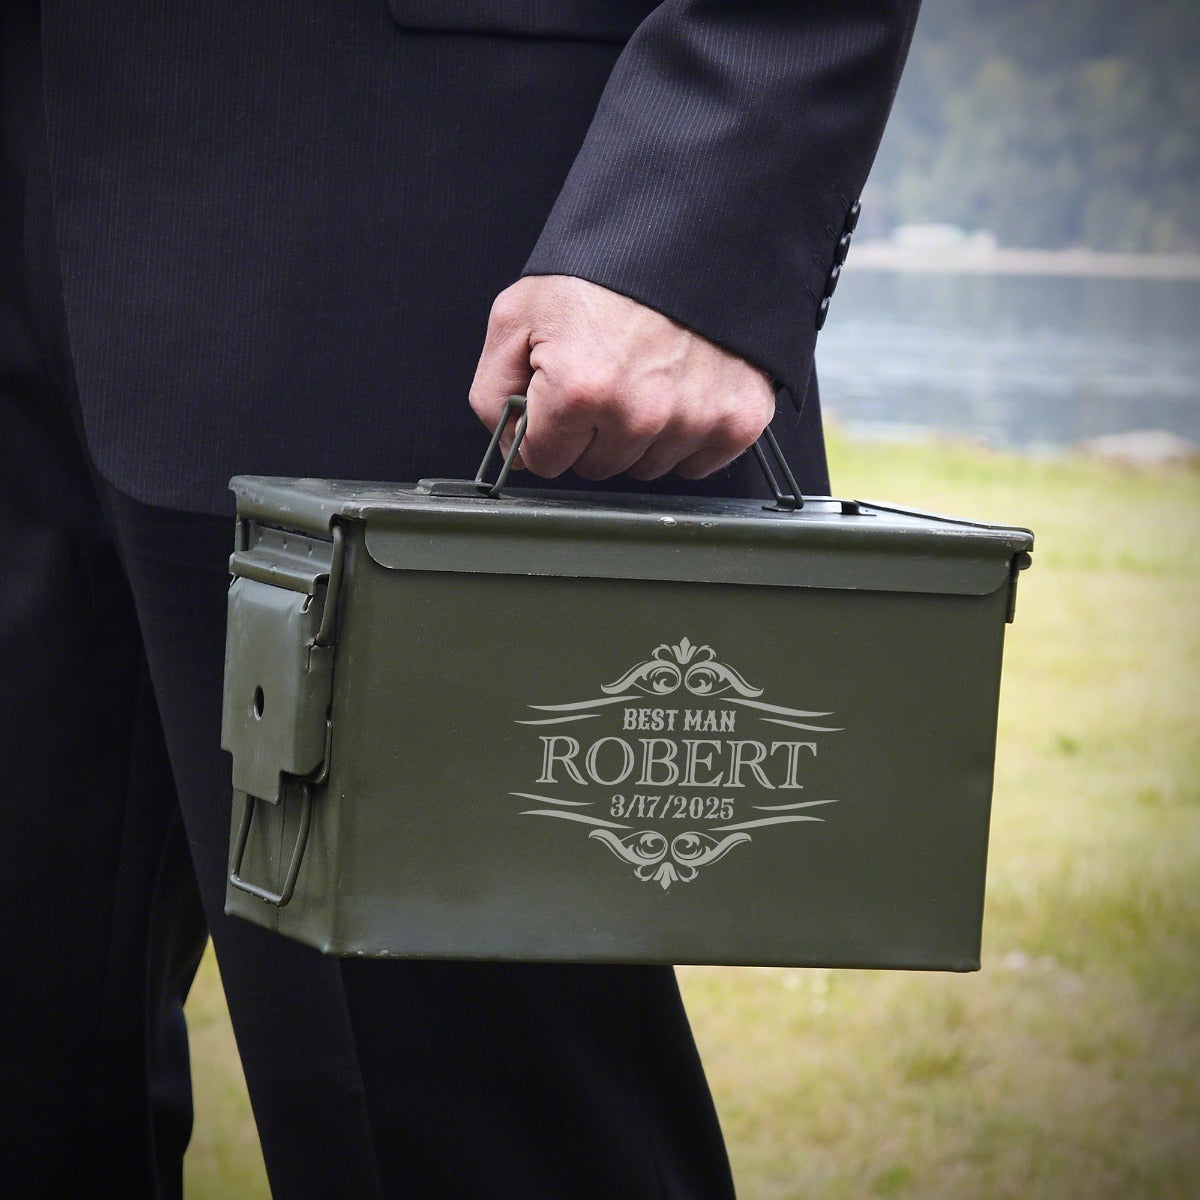 Personalized Groomsmen Gift Ideas 30 Cal Ammo Can - 5pc Gift Set